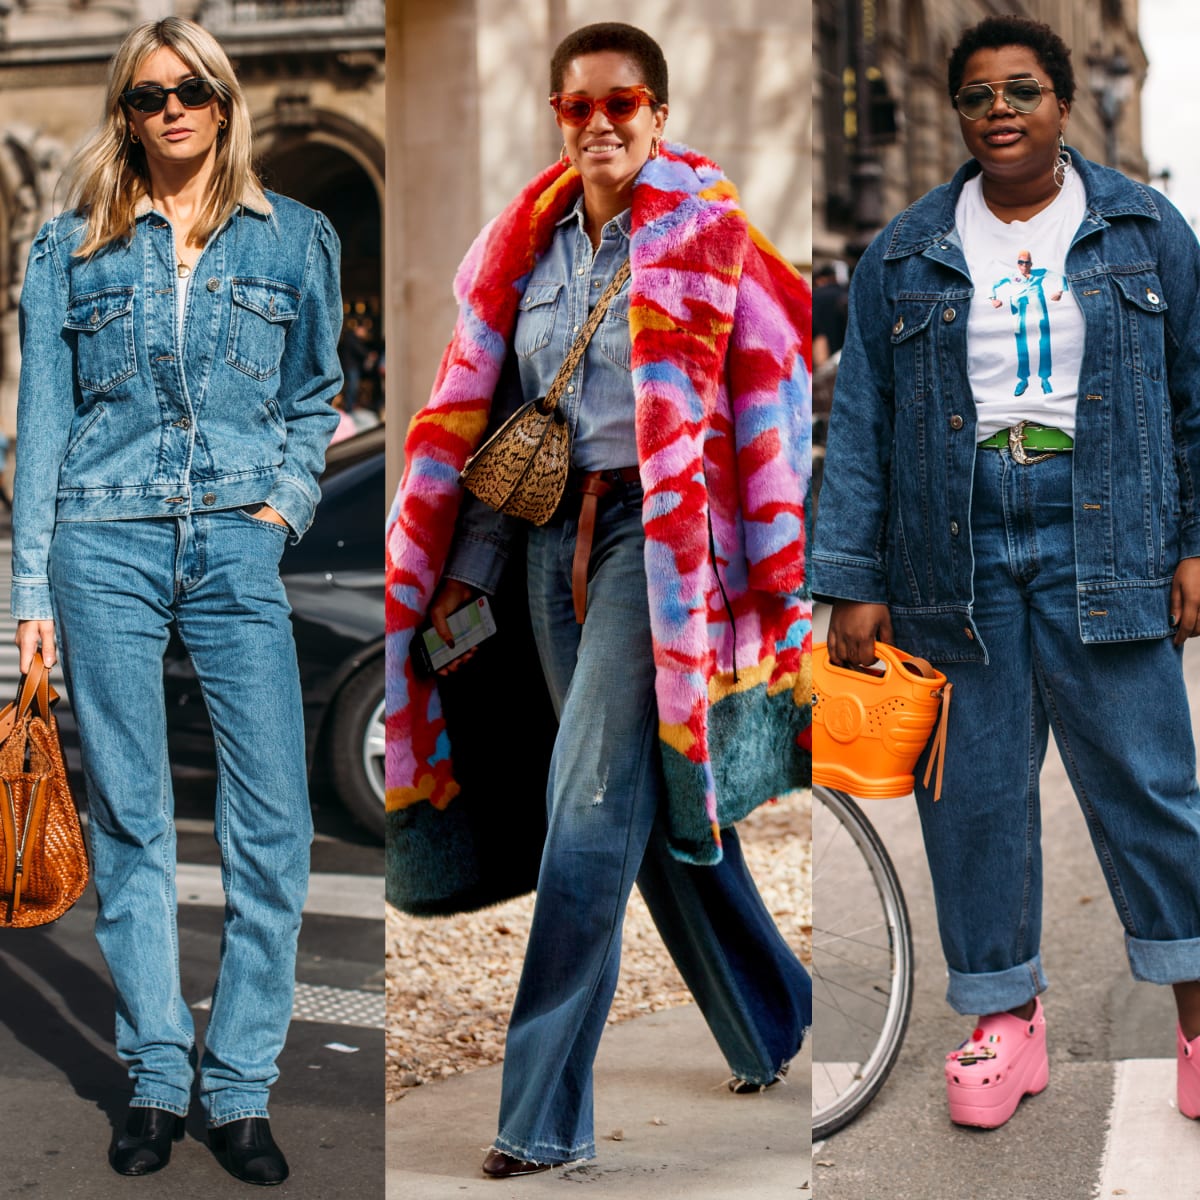 Chanel Street Style Looks From Spring 2020 Paris Fashion Week  Denim  street style, Chanel street style, High fashion street style